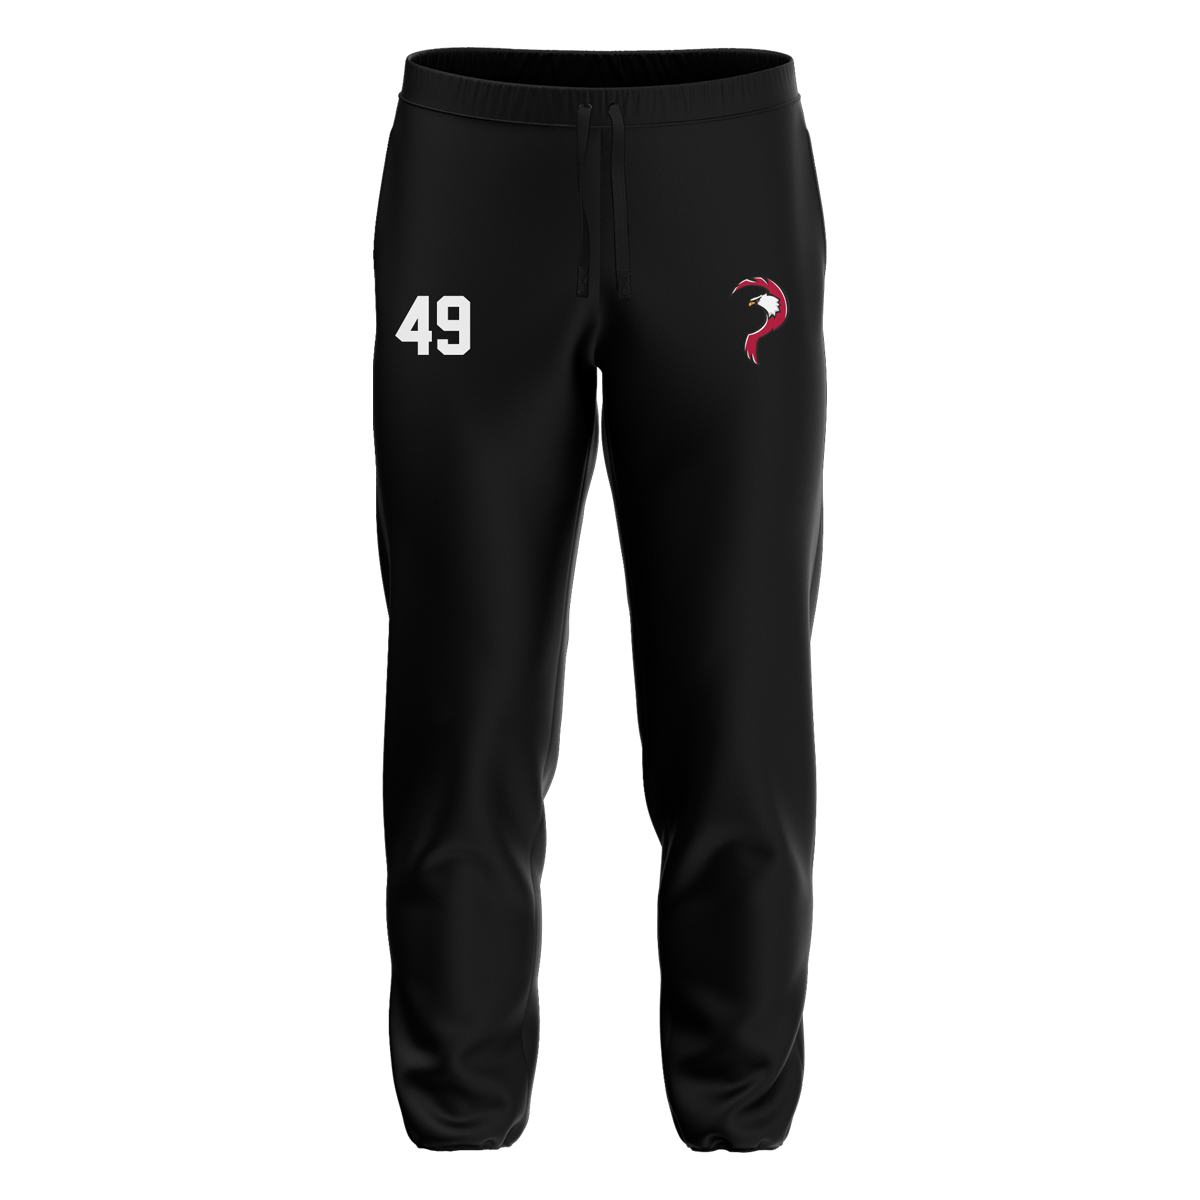 Patriots Basic Sweatpant with Cuffs ST793 with Playernumber/Initials